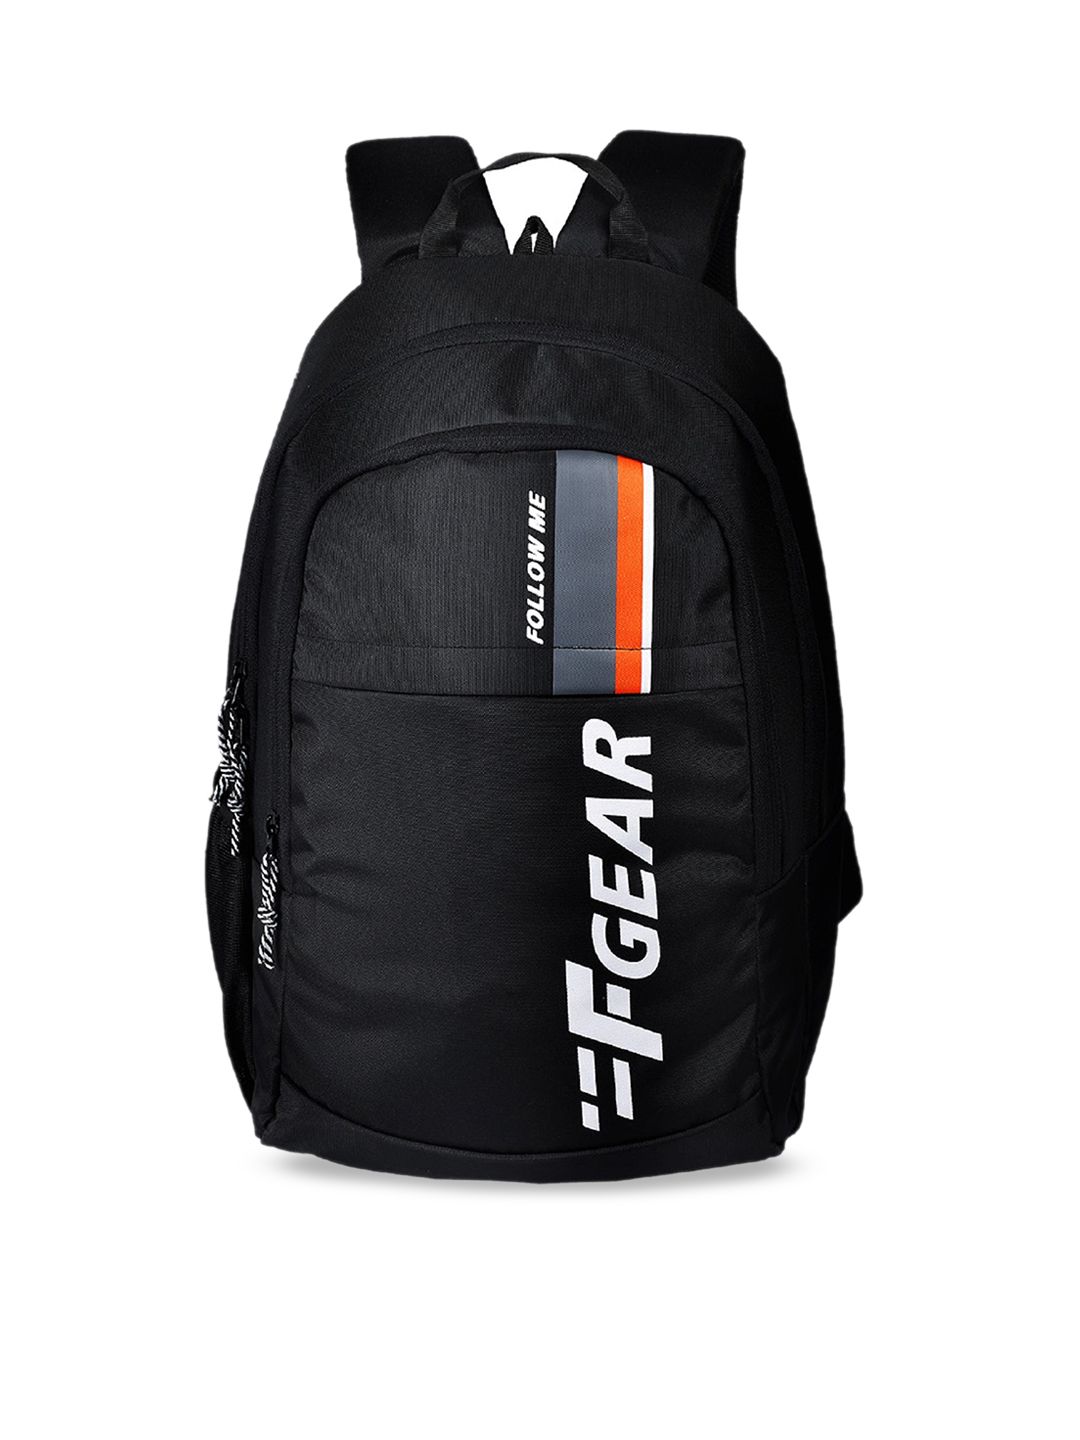 F Gear Unisex Black Brand Logo Water-Resistant Backpack Price in India